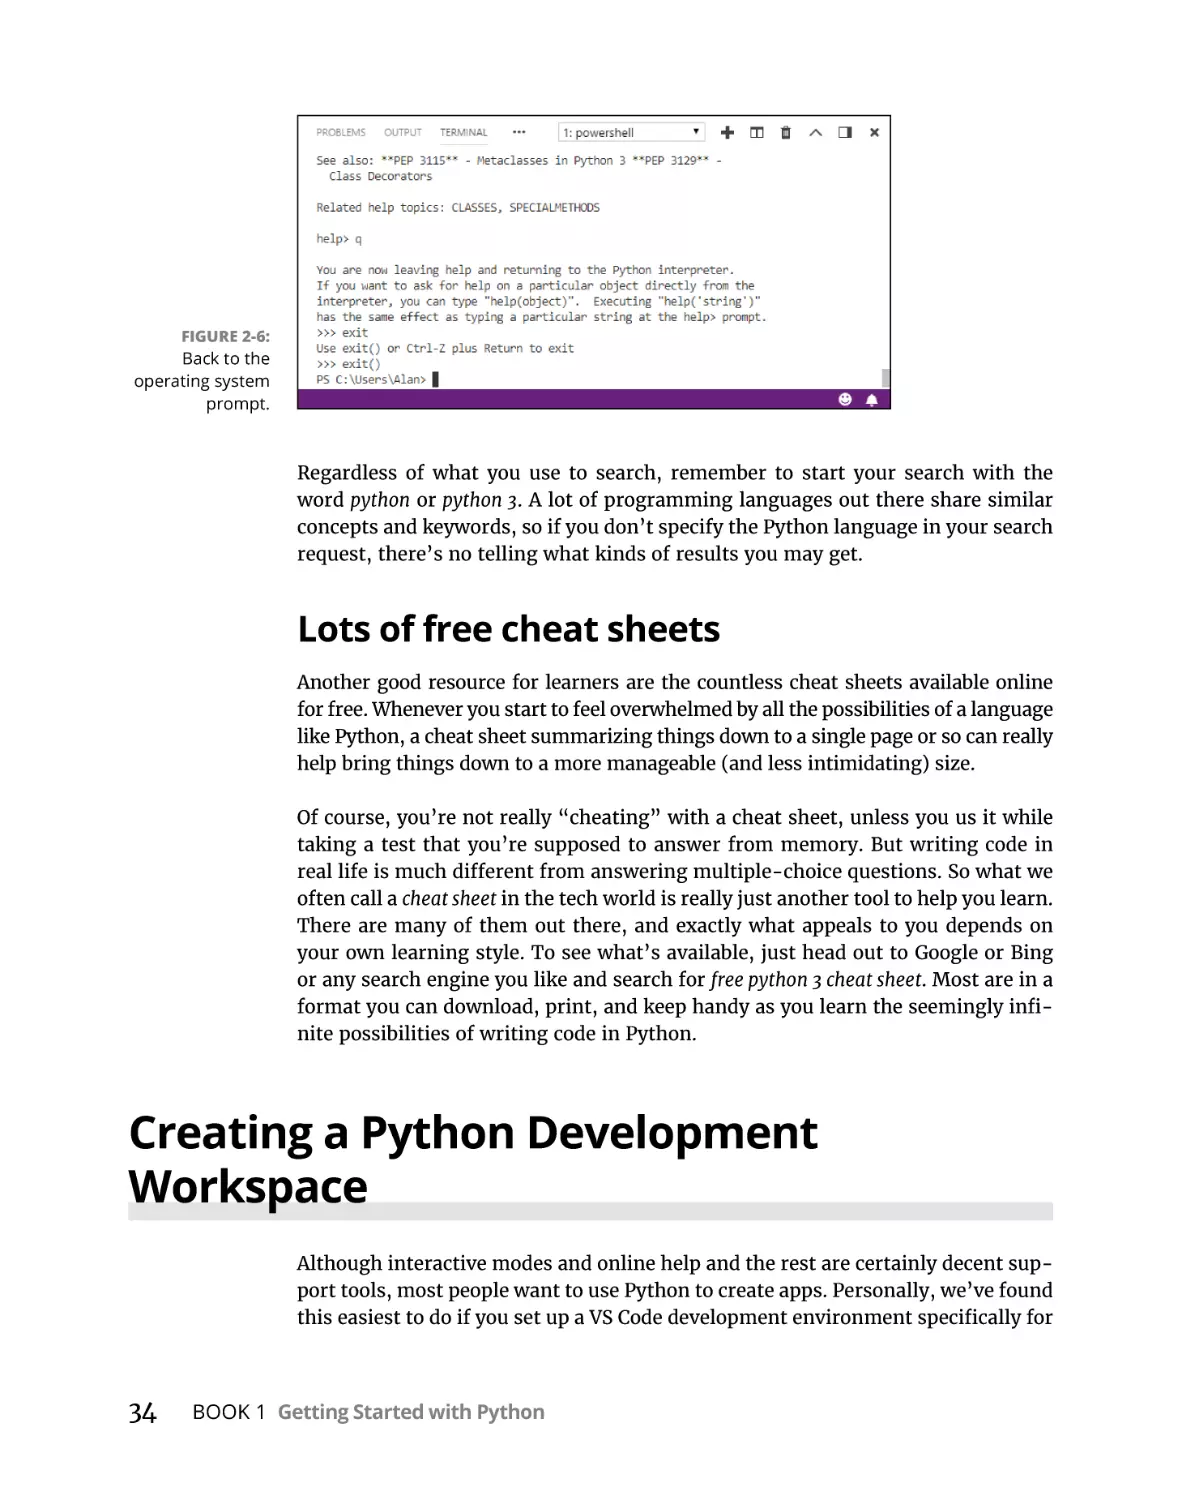 Lots of free cheat sheets
Creating a Python Development Workspace